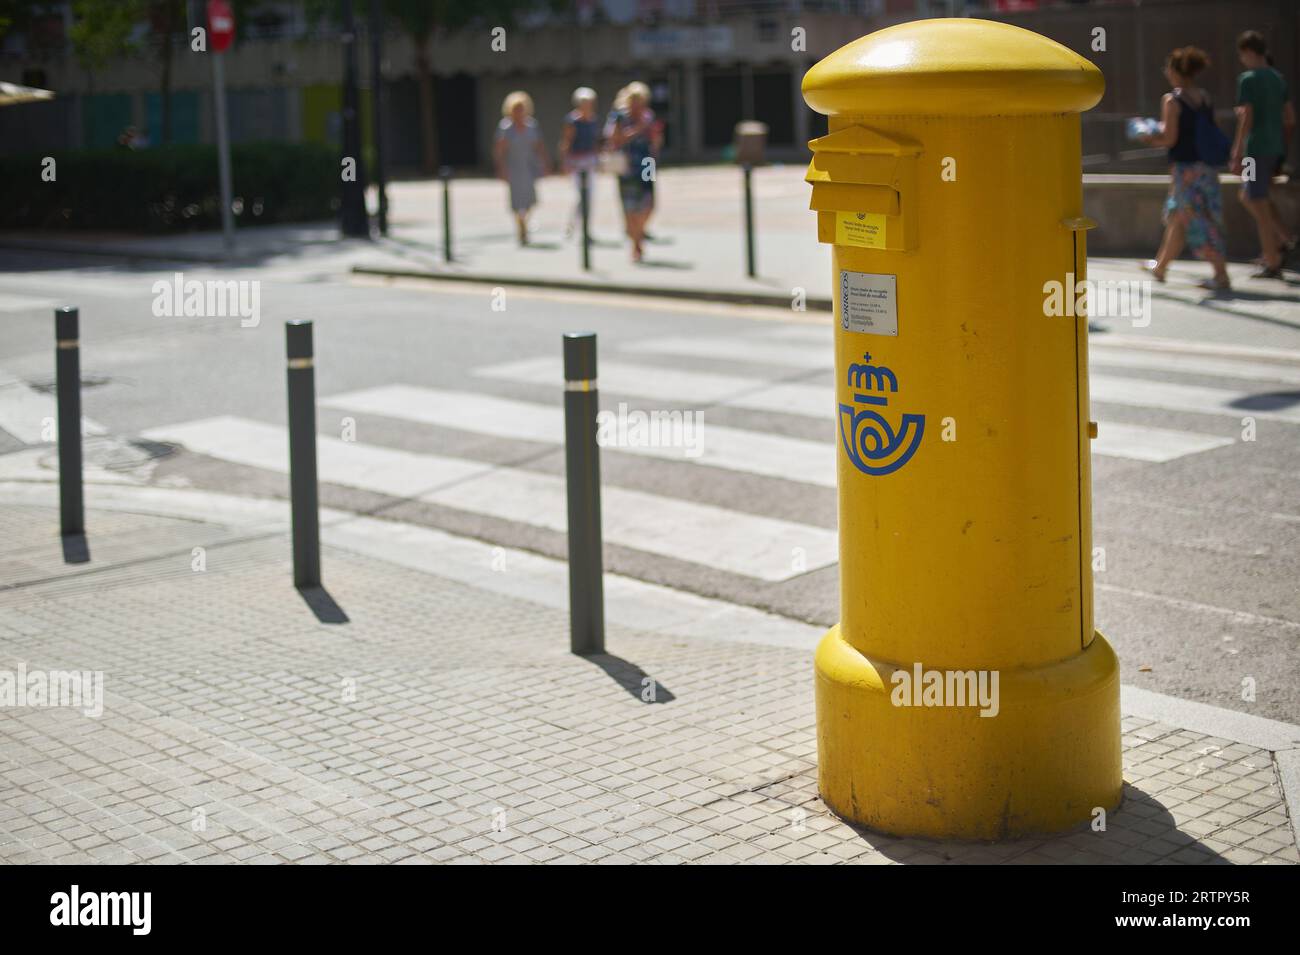 Viladecans, Spain - September 14, 2023: Yellow mailbox for sending postal letters of the Spanish state-owned company Correos y Tel egrafos, located in Stock Photo